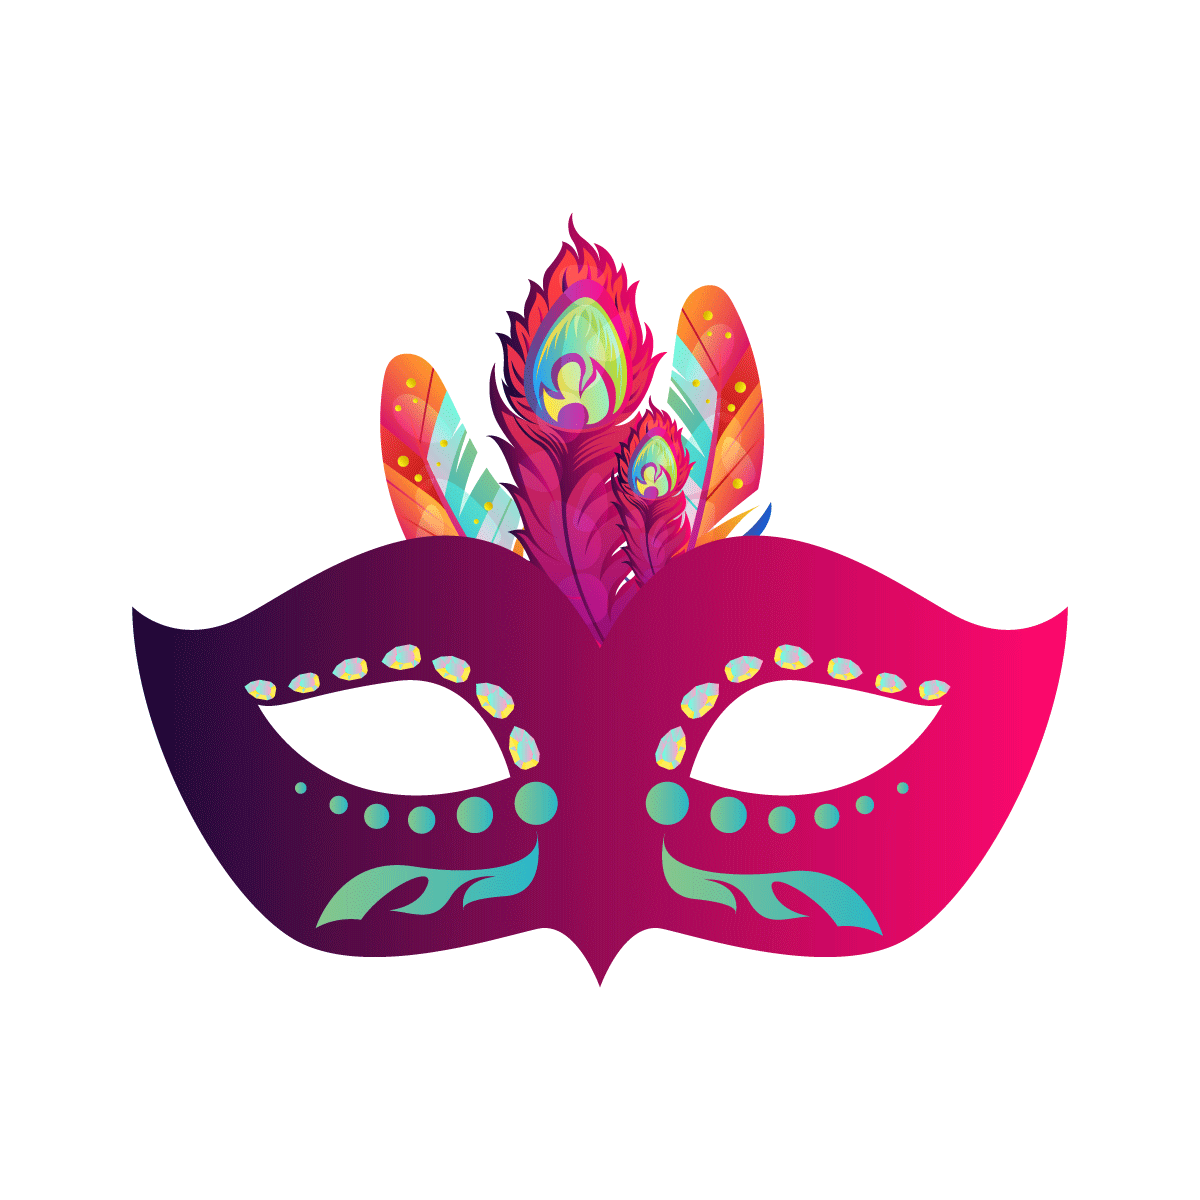 Carnival design festival Holiday ILLUSTRATION  Isolated mask Masquerade party vector